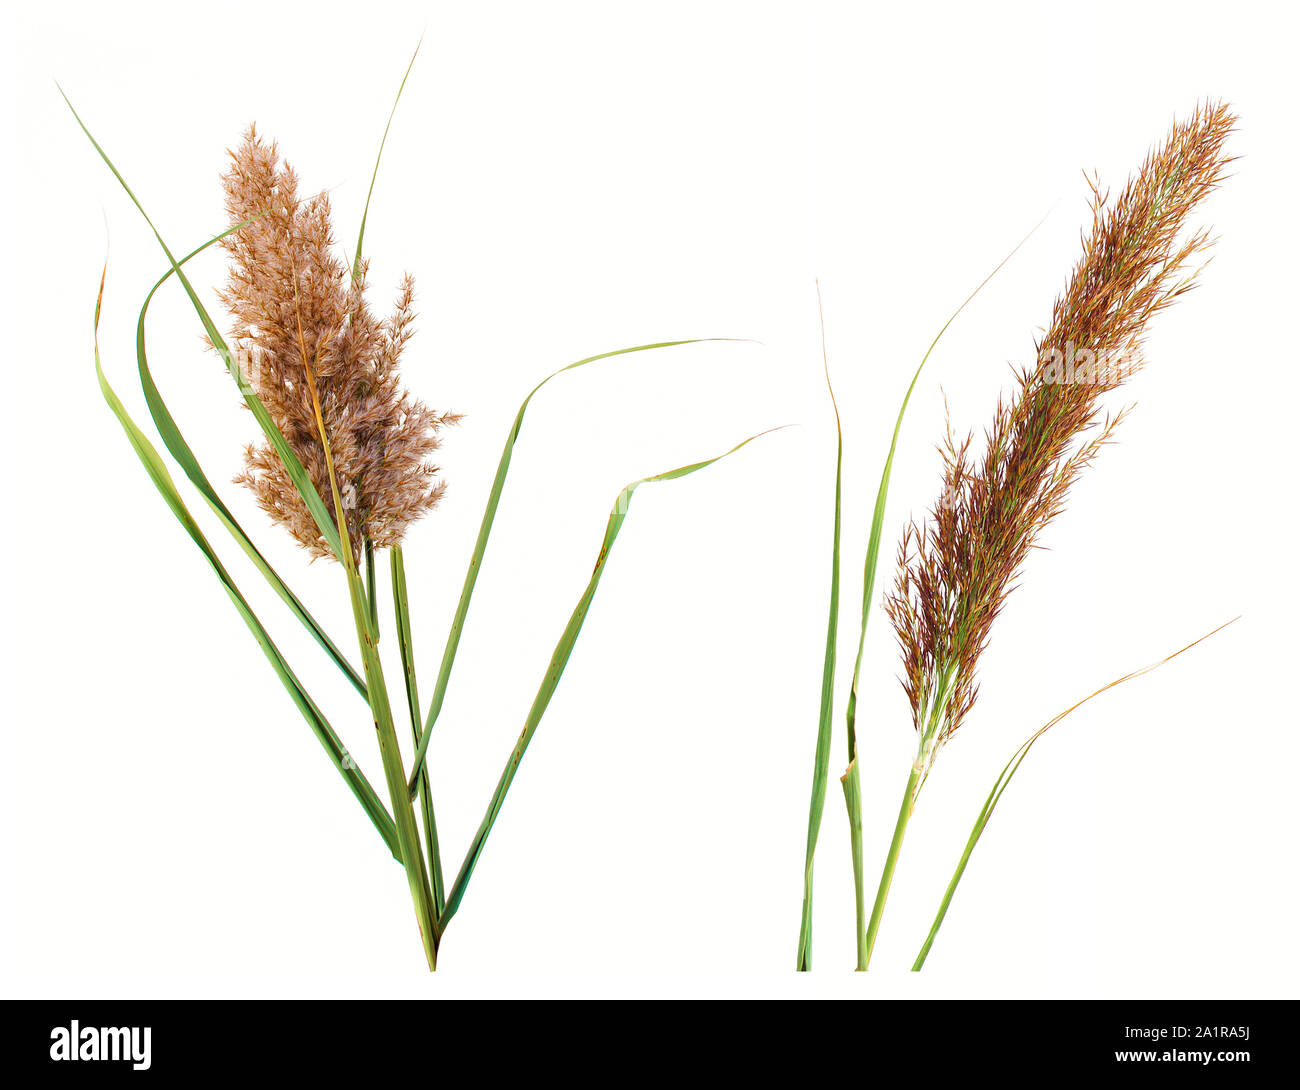 Reed stems, white background. Stock Photo